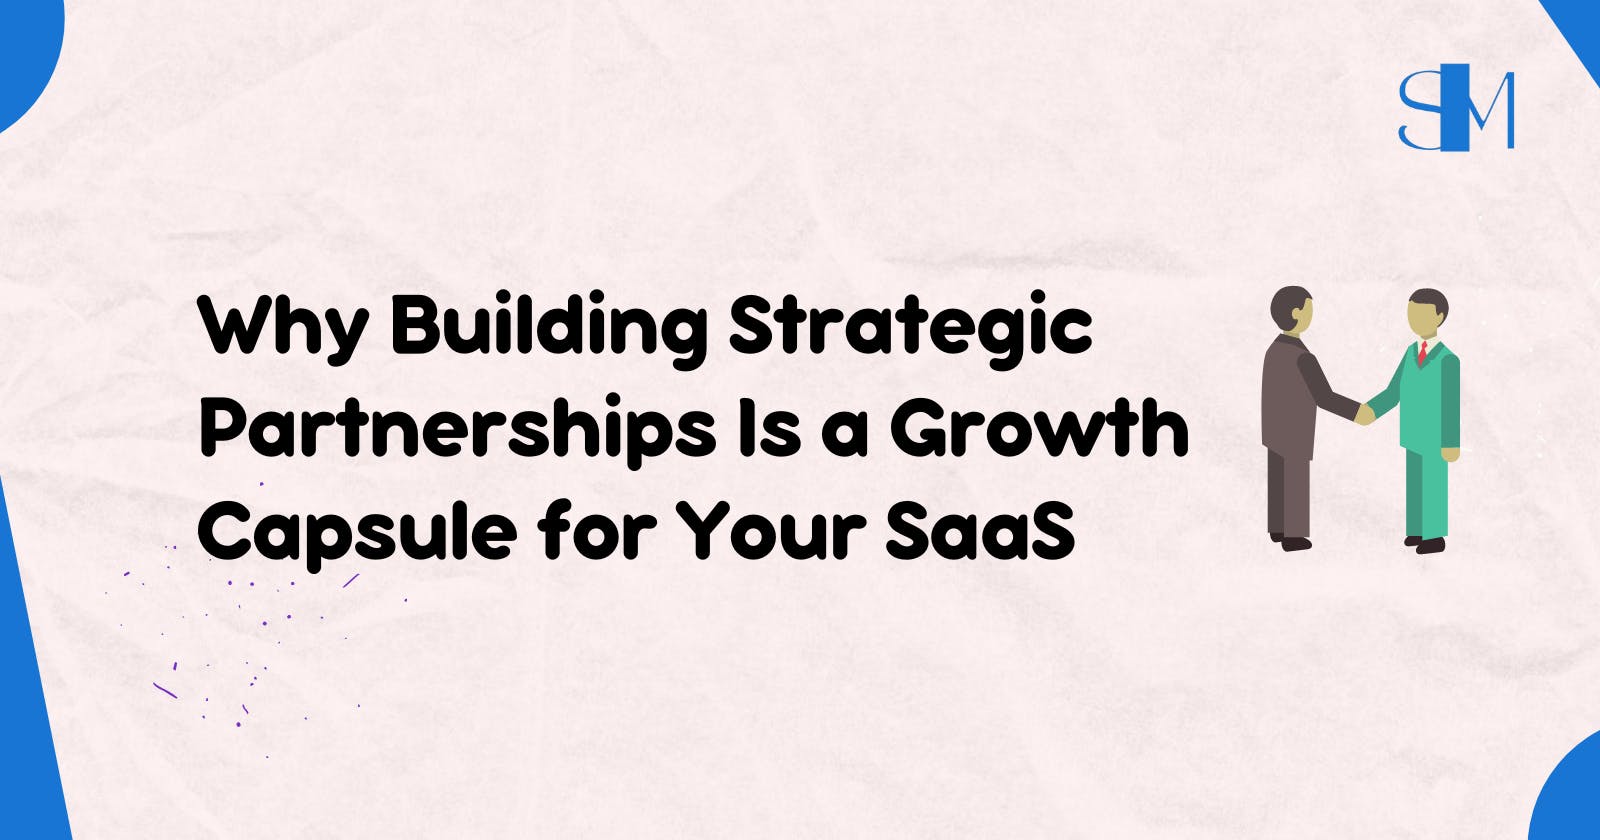 Why Building Strategic Partnerships Is a Growth Capsule for Your SaaS